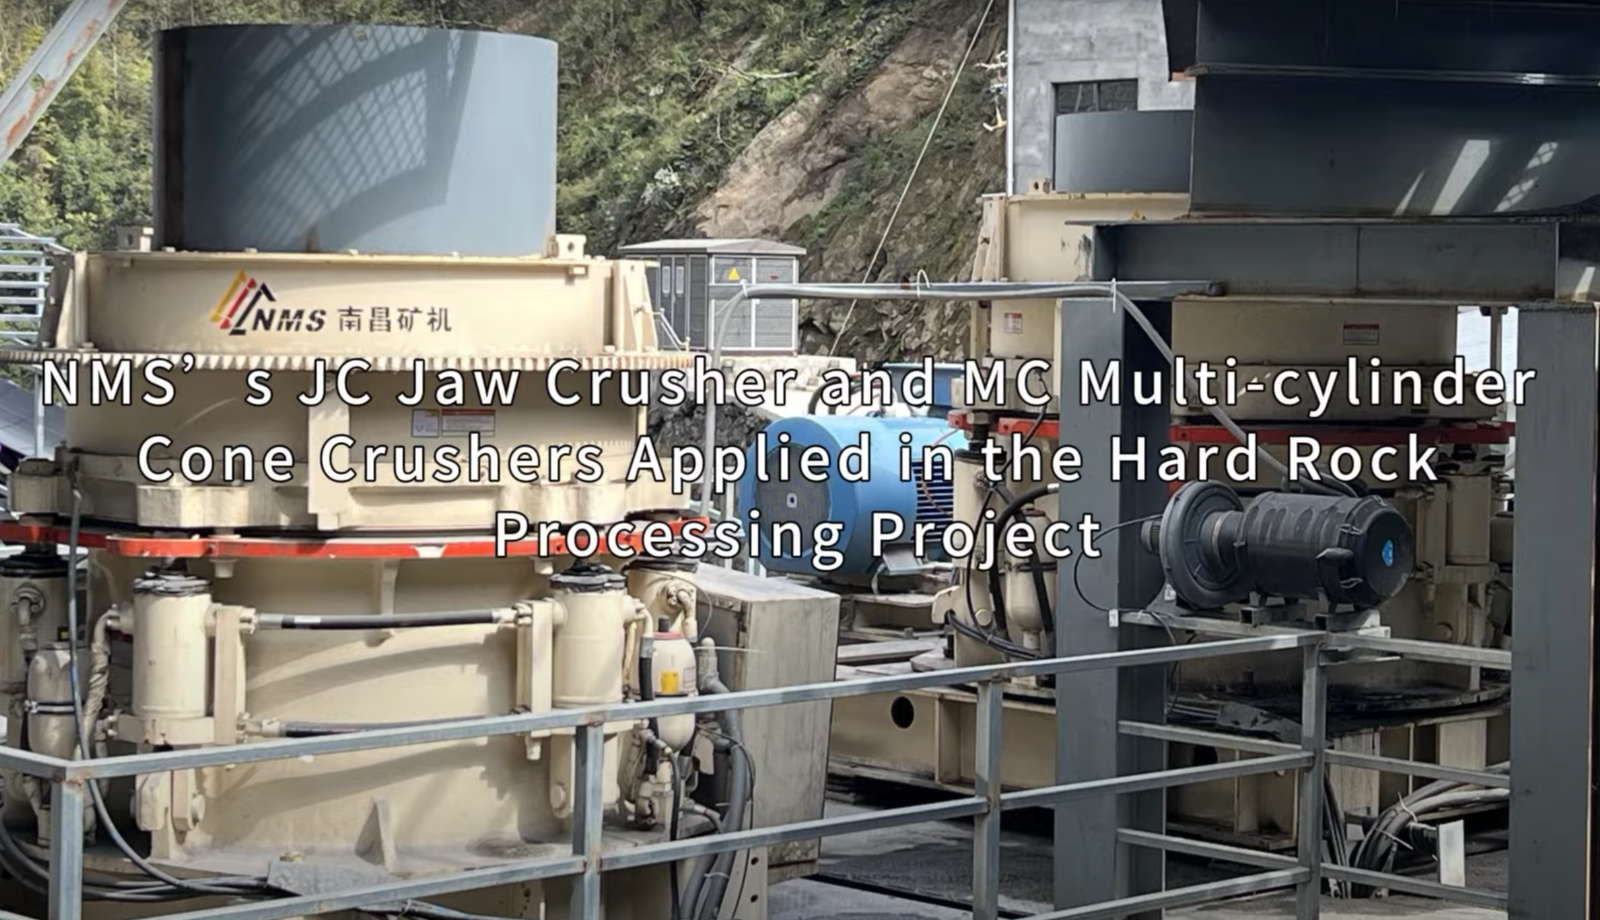 NMS’s JC Jaw Crusher and MC Multi-cylinder Cone Crushers Applied in the Hard Rock Processing Project